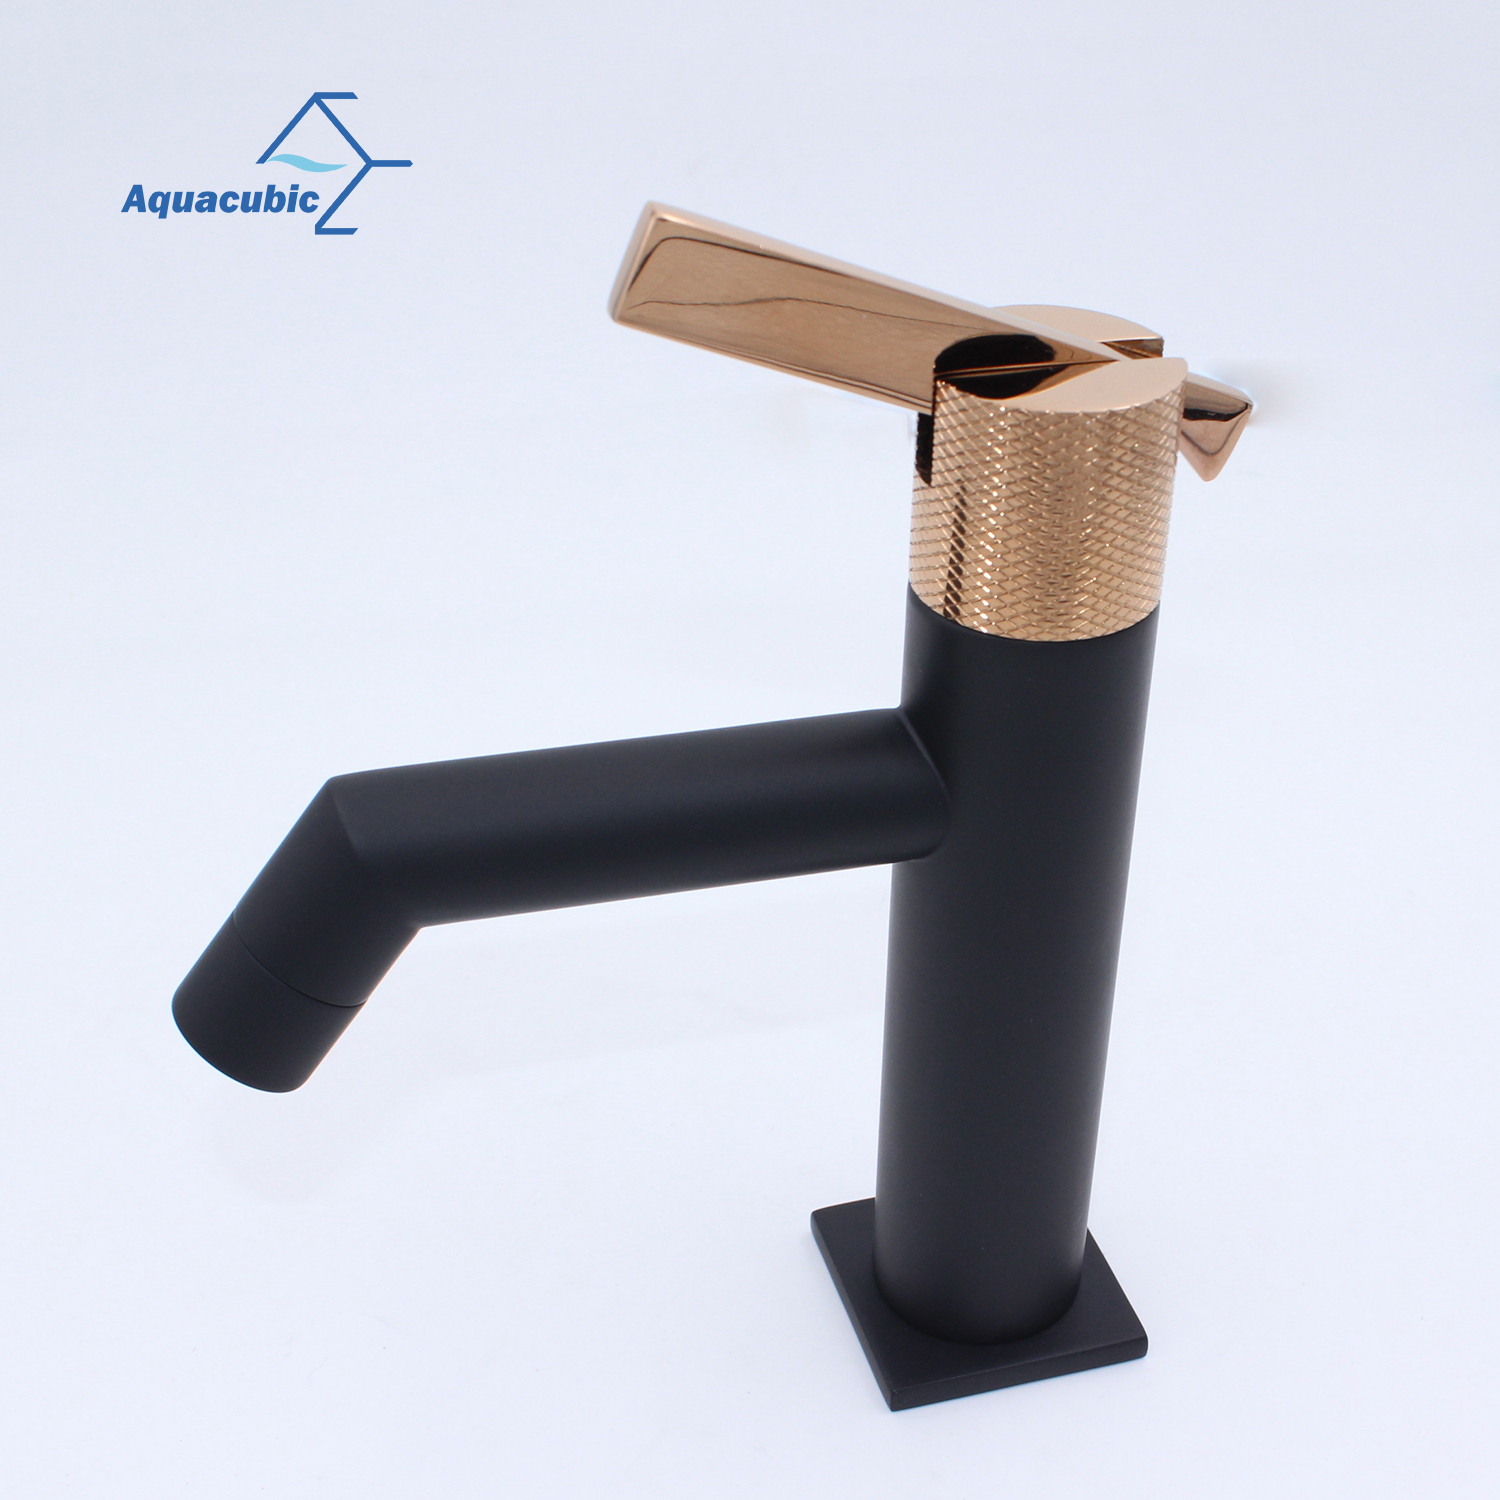 North America Best Selling Upc Black and Gold brass Bathroom Sink Faucet